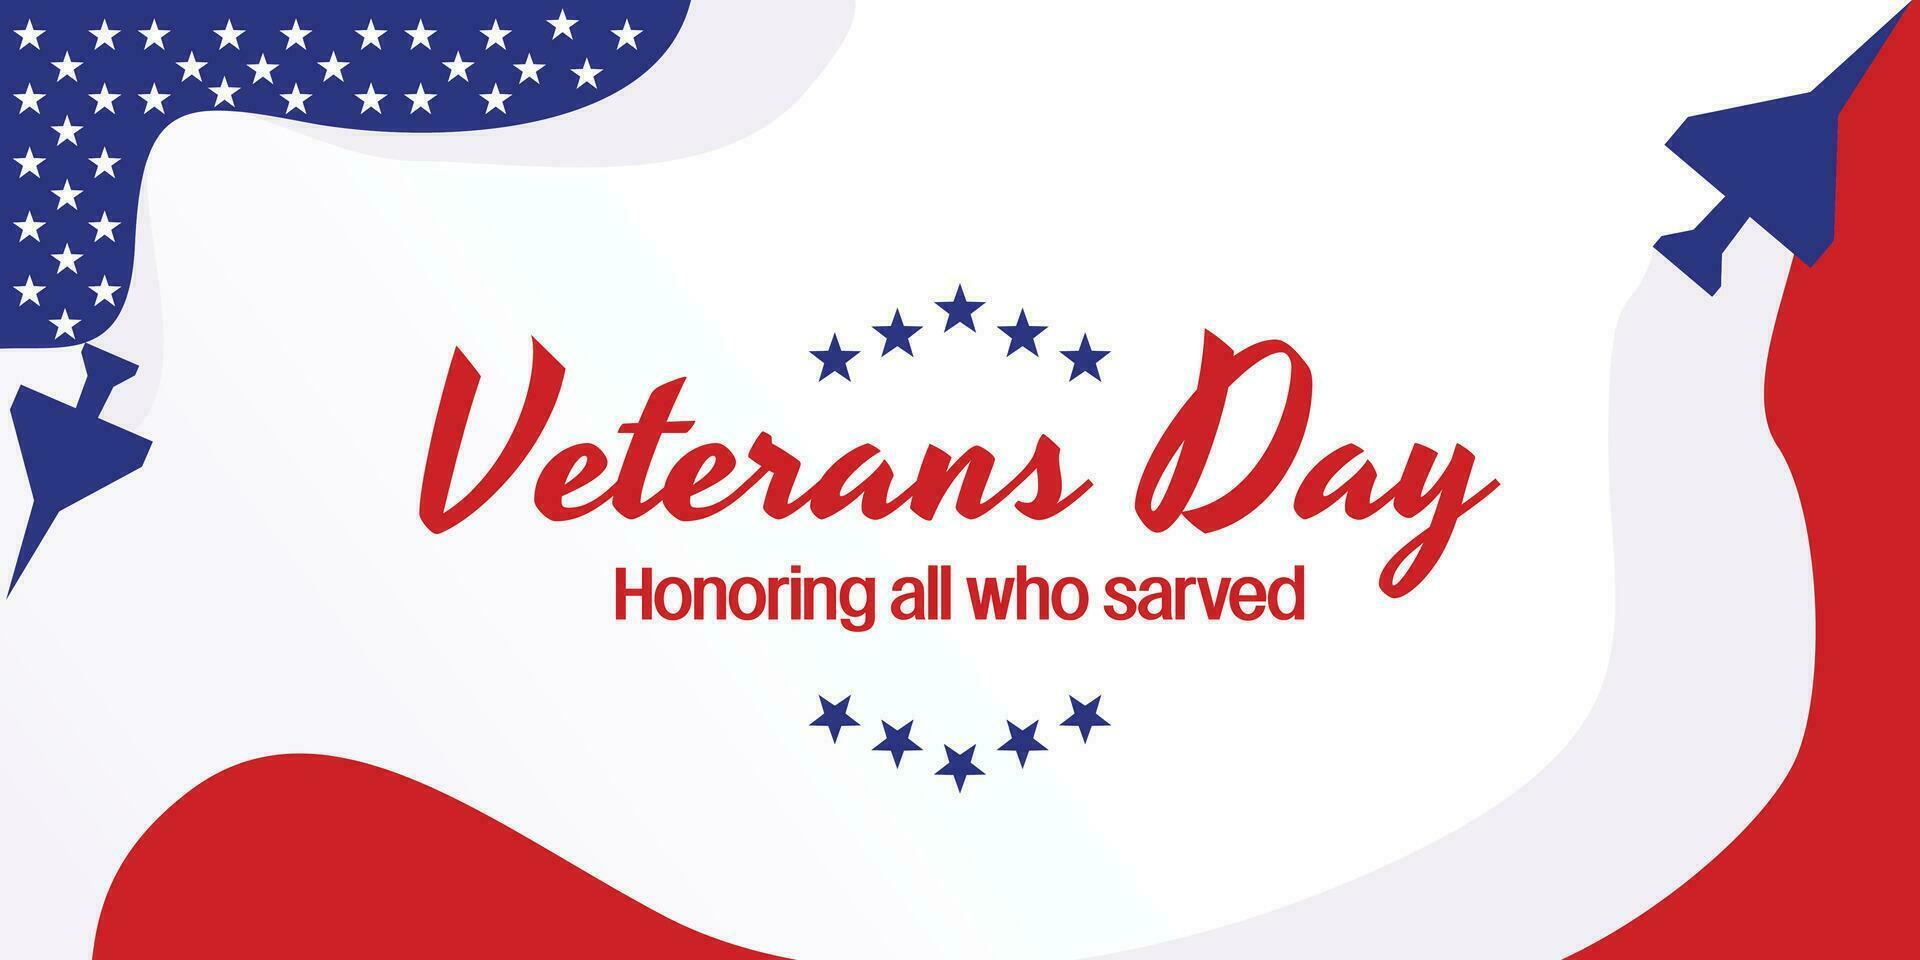 veterans day celebration background, vector american flag with airplane icon. design for banner, greeting card, flyer, social media, web.